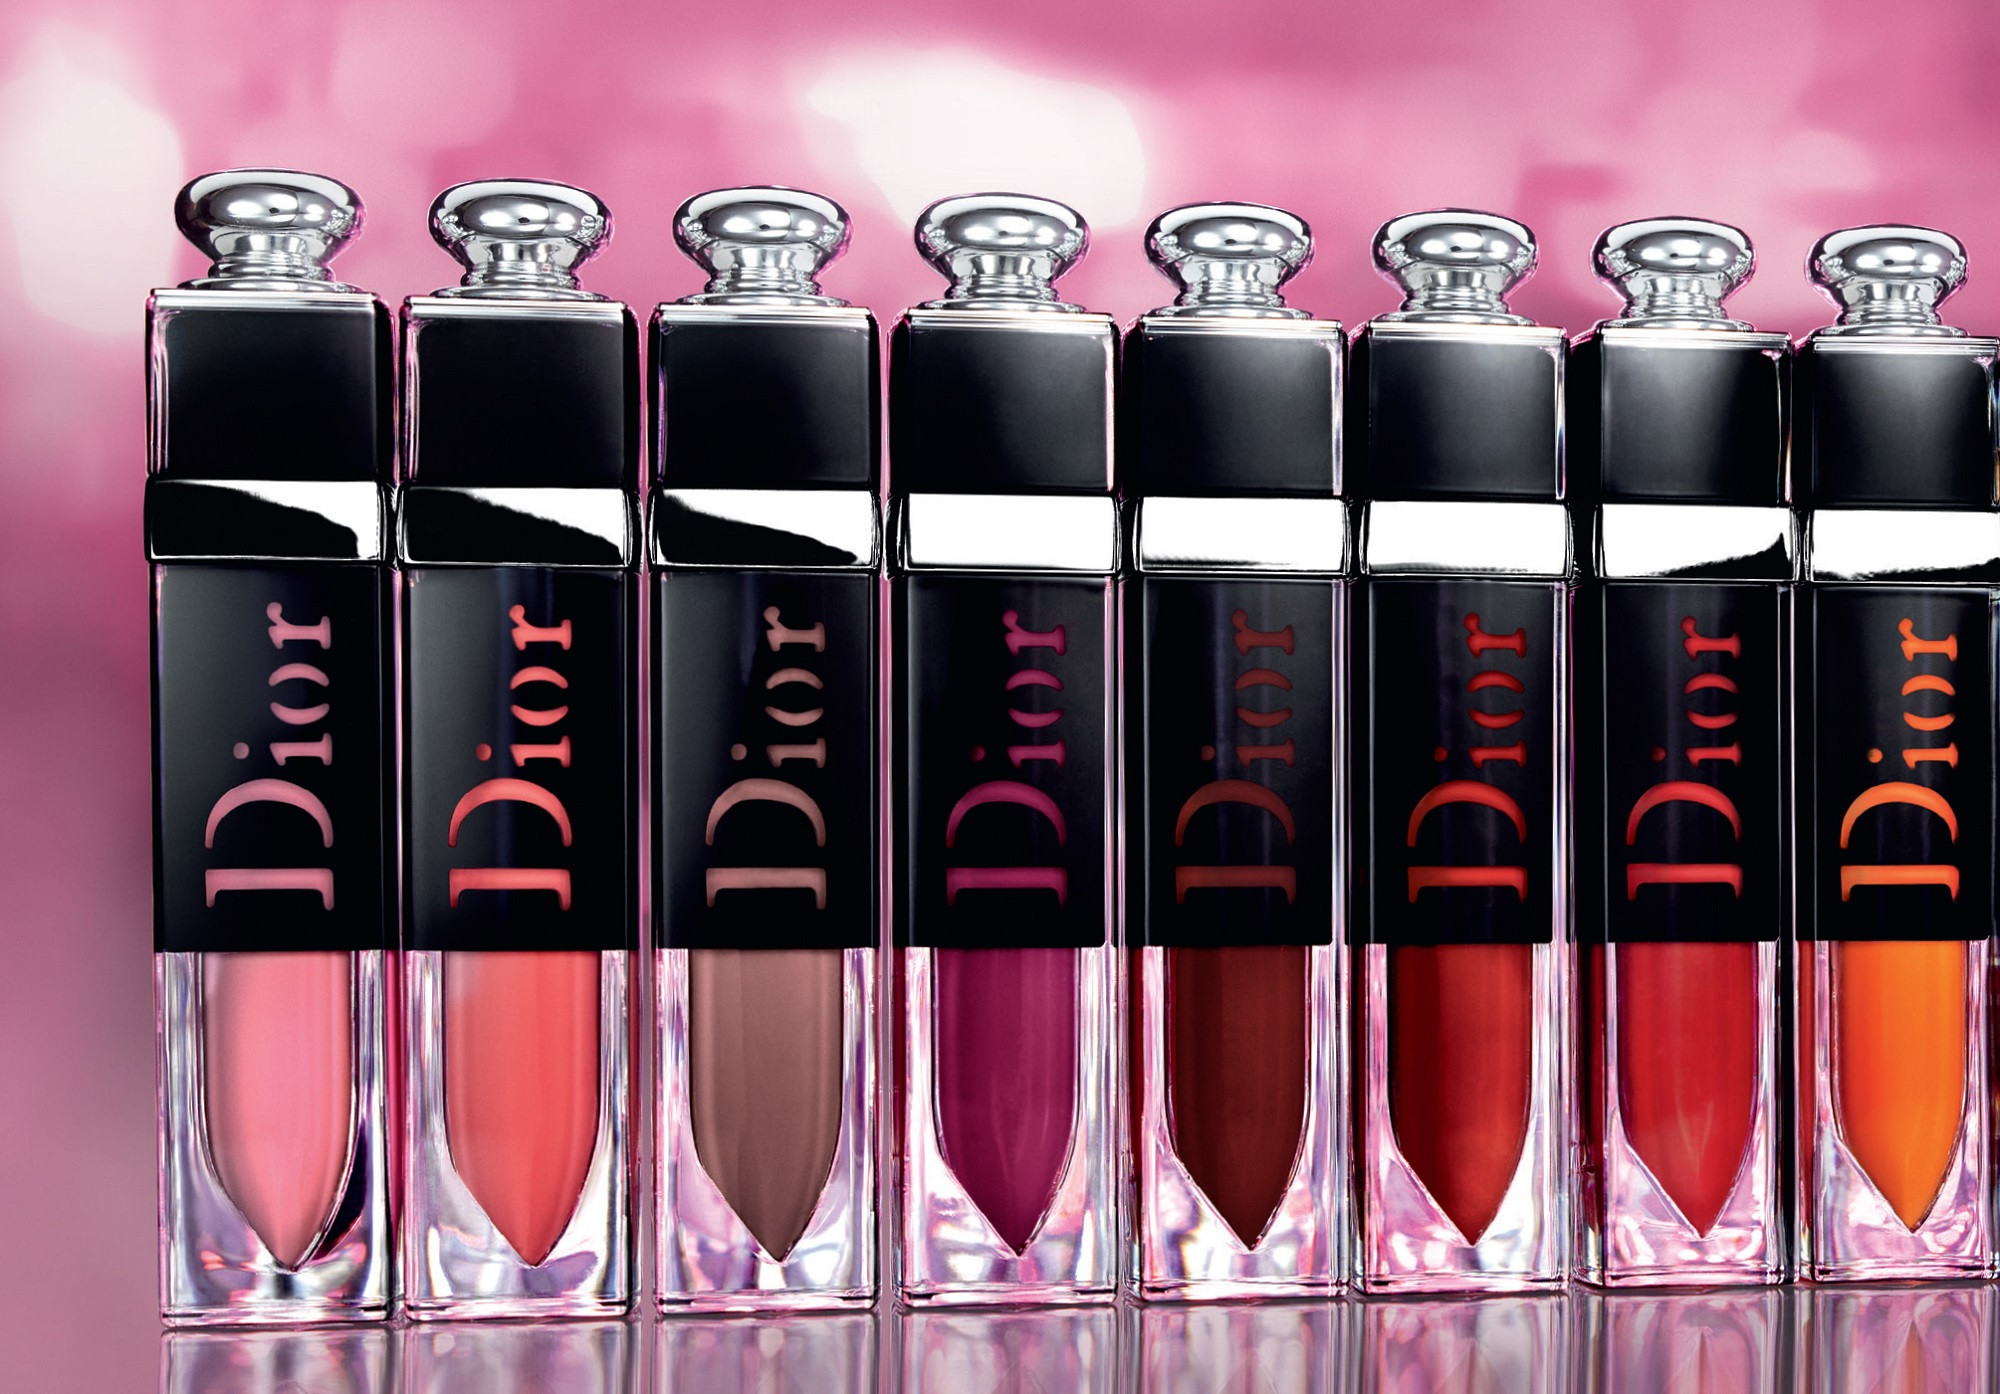 Dior  Dior Addict Lacquer Plump Review and Swatches  The Happy Sloths  Beauty Makeup and Skincare Blog with Reviews and Swatches